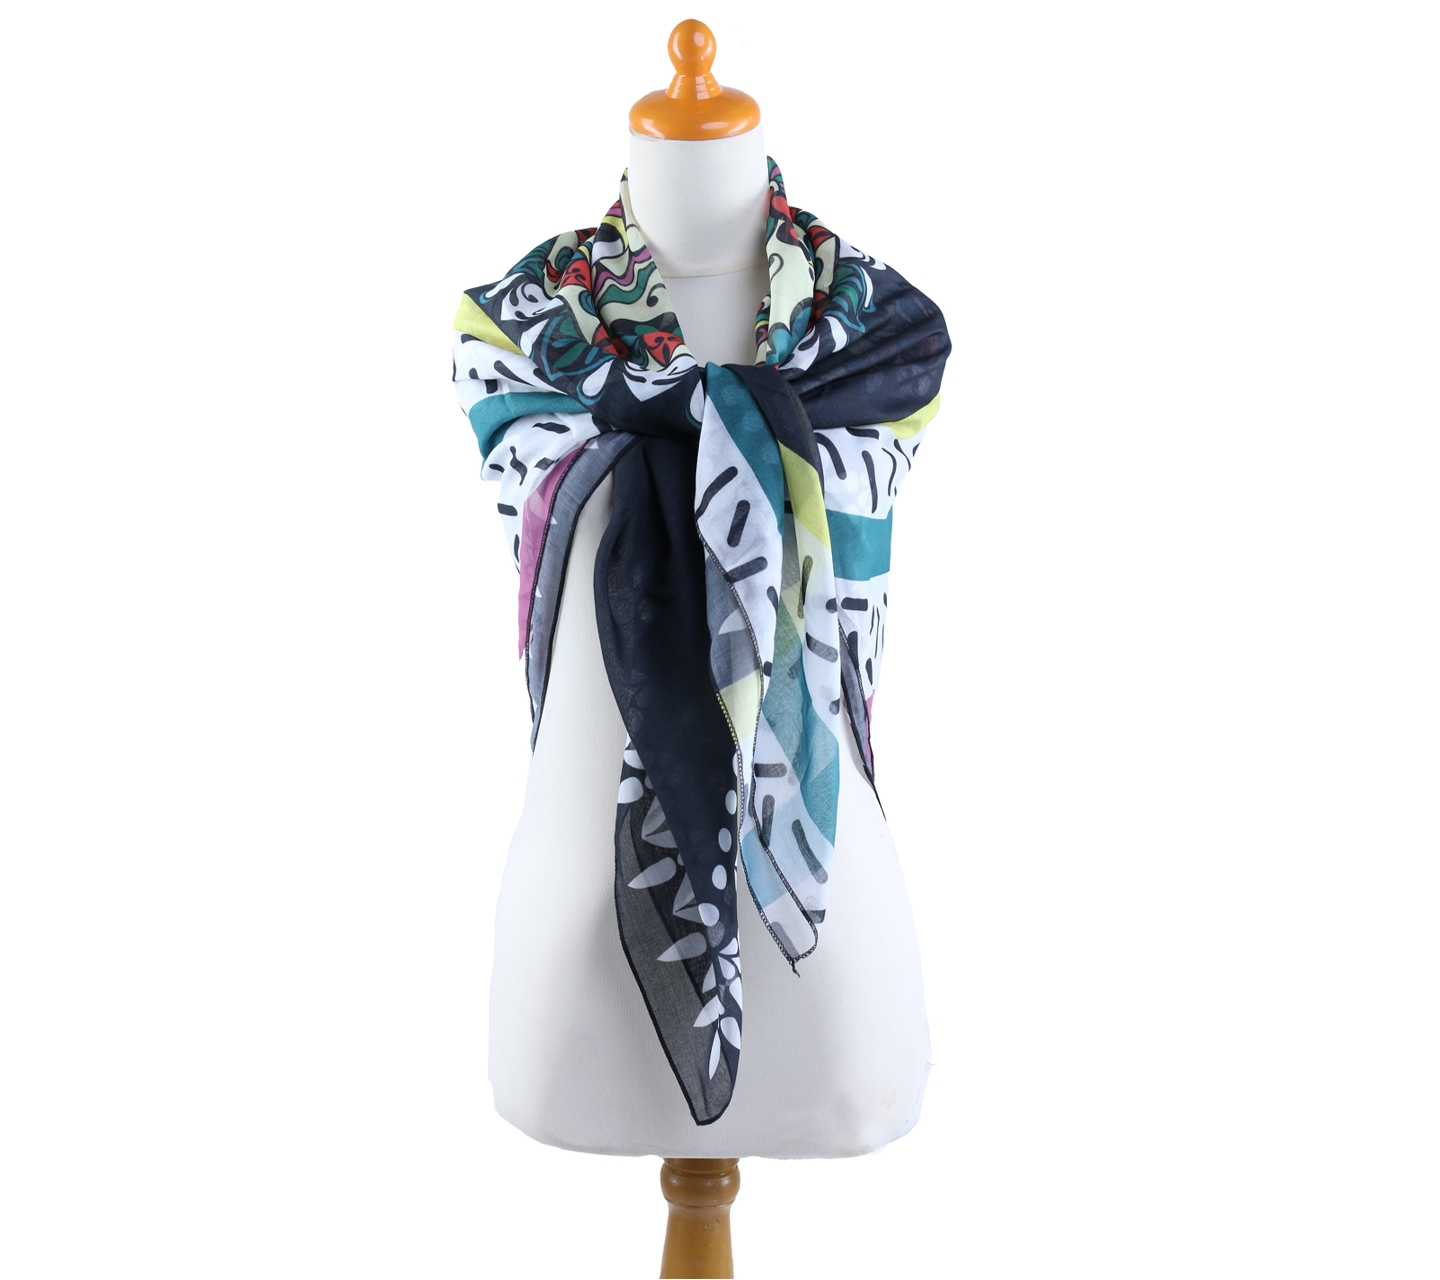 Multi Colour Patterned Scarf